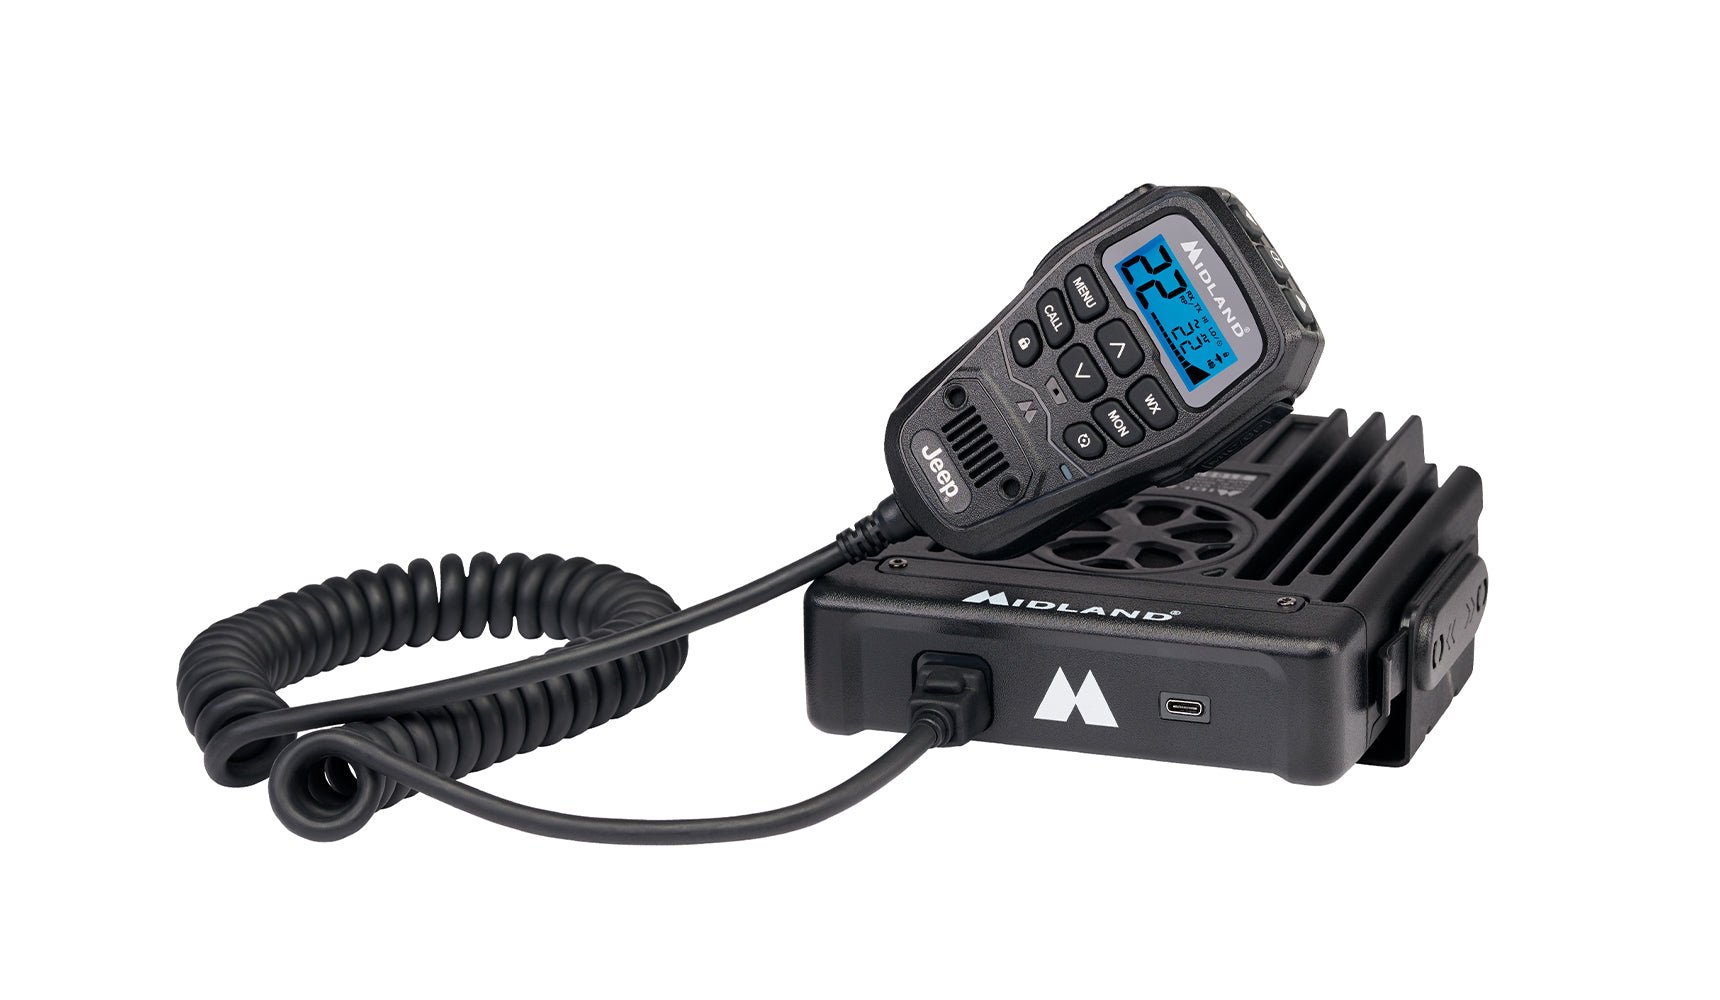 Midland MXT115 15 Watt GMRS MicroMobile Two Way Radio Off Roading Outdoor RZR Farm, Trails Radio Repeater Channels Extended Range External - 3